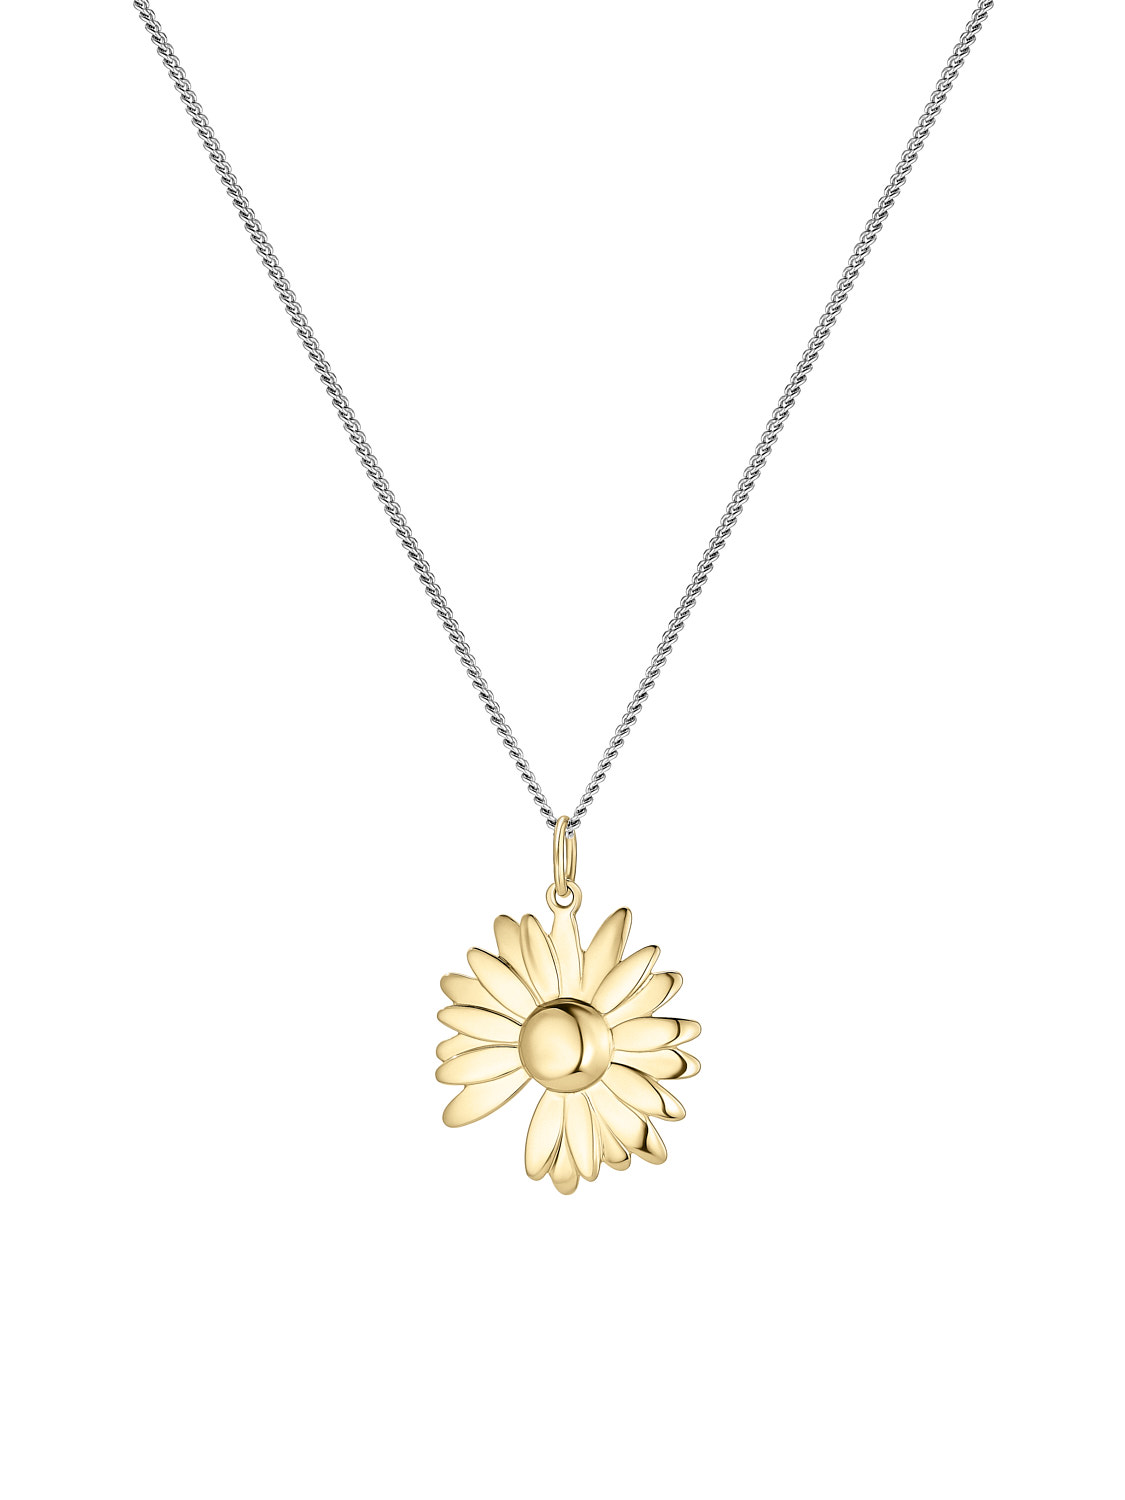 DAISY MISSING A PETAL GOLD-PLATED TRINKET  